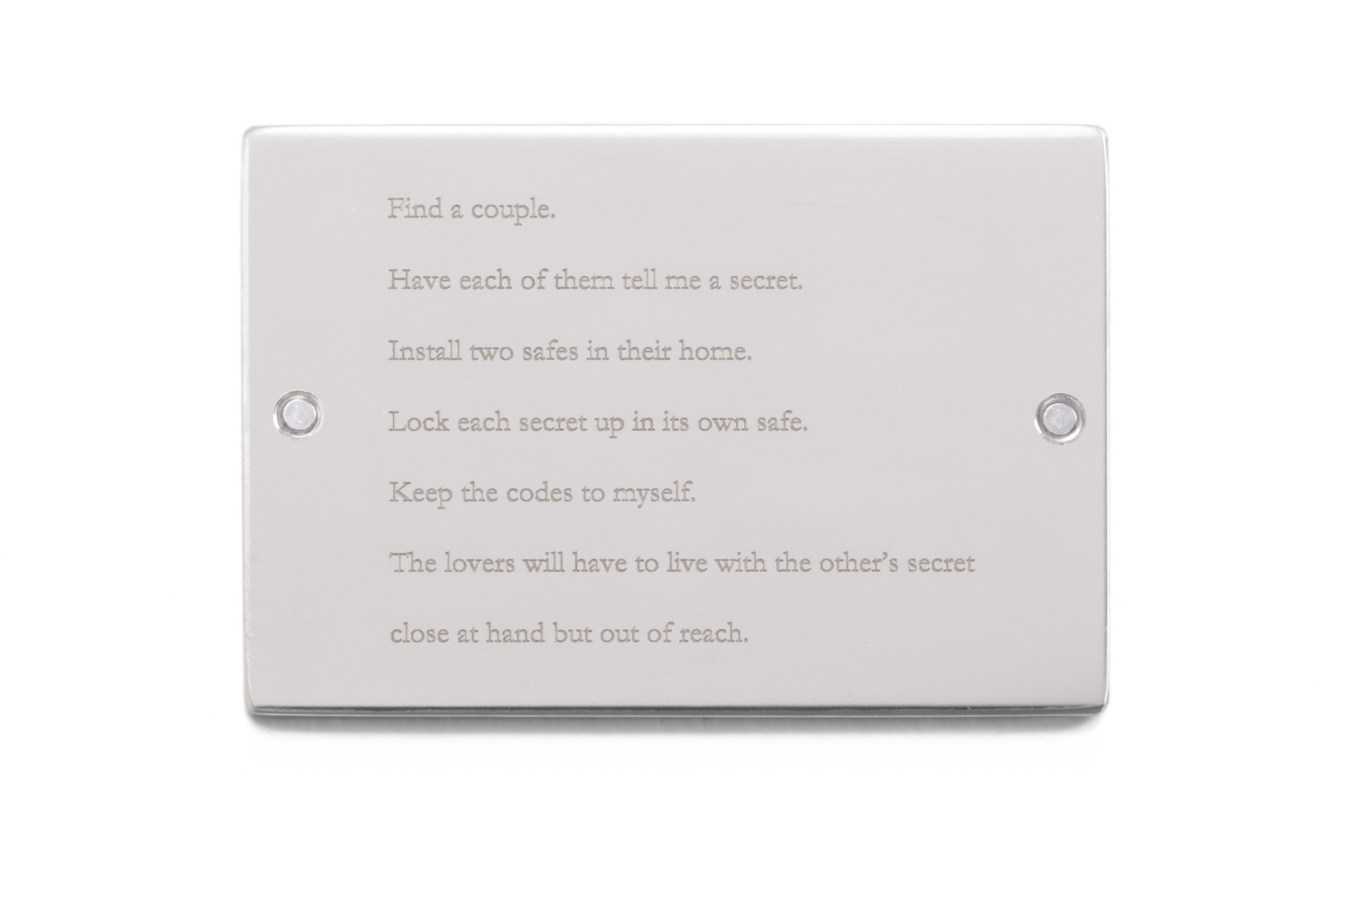 Color image of sliver plaque inscribed with "Find a couple. Have each of them tell me a secret. Install two safes in their home. Lock each secret up in its own safe. Keep the codes to myself. The lovers will have to live with the other's secret close at hand but out of reach." on white background